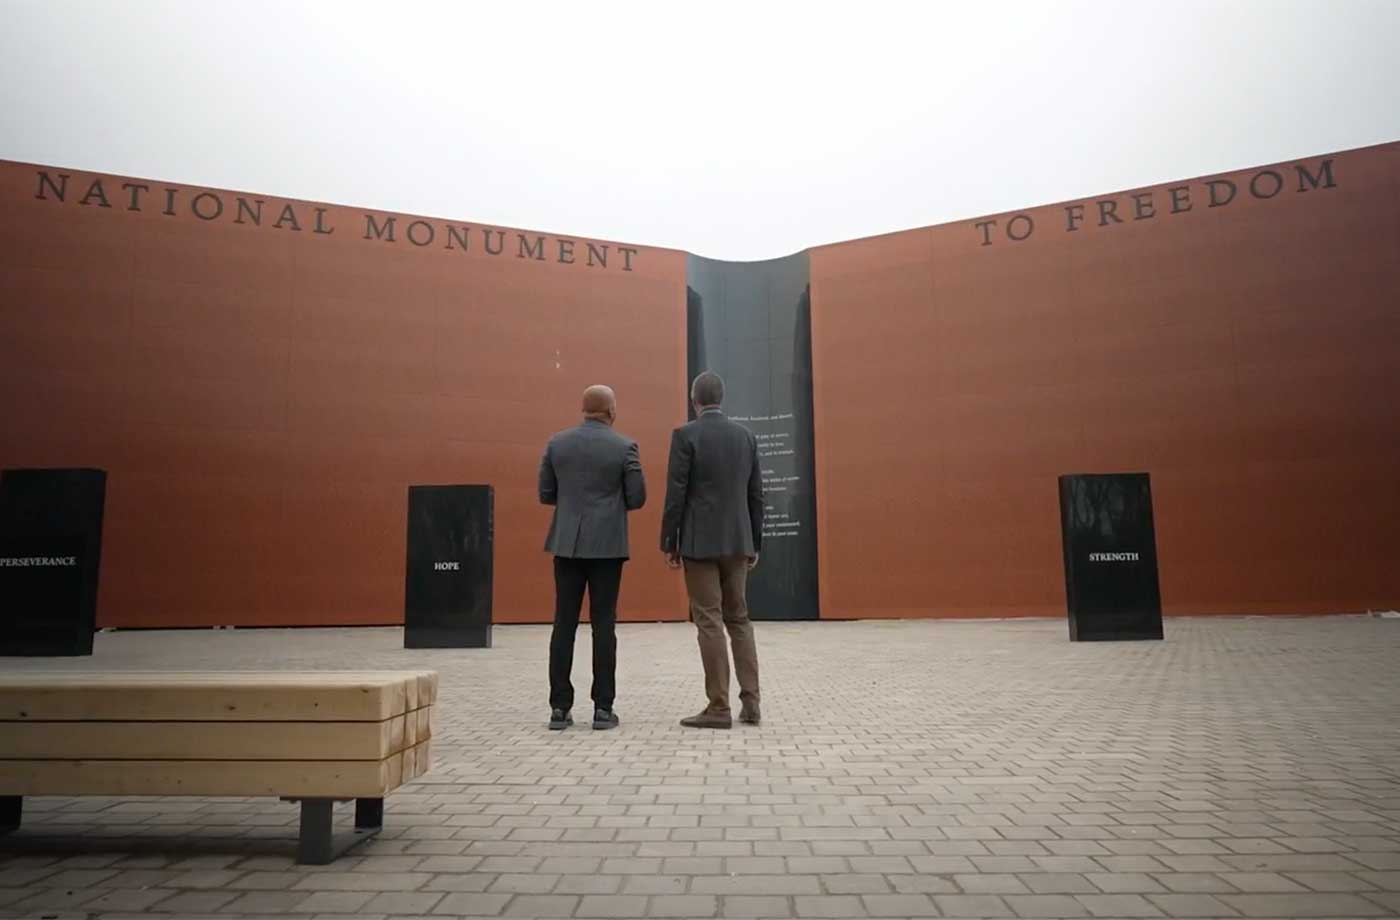 New Memorial Marks the Enslavement of Millions of Black People